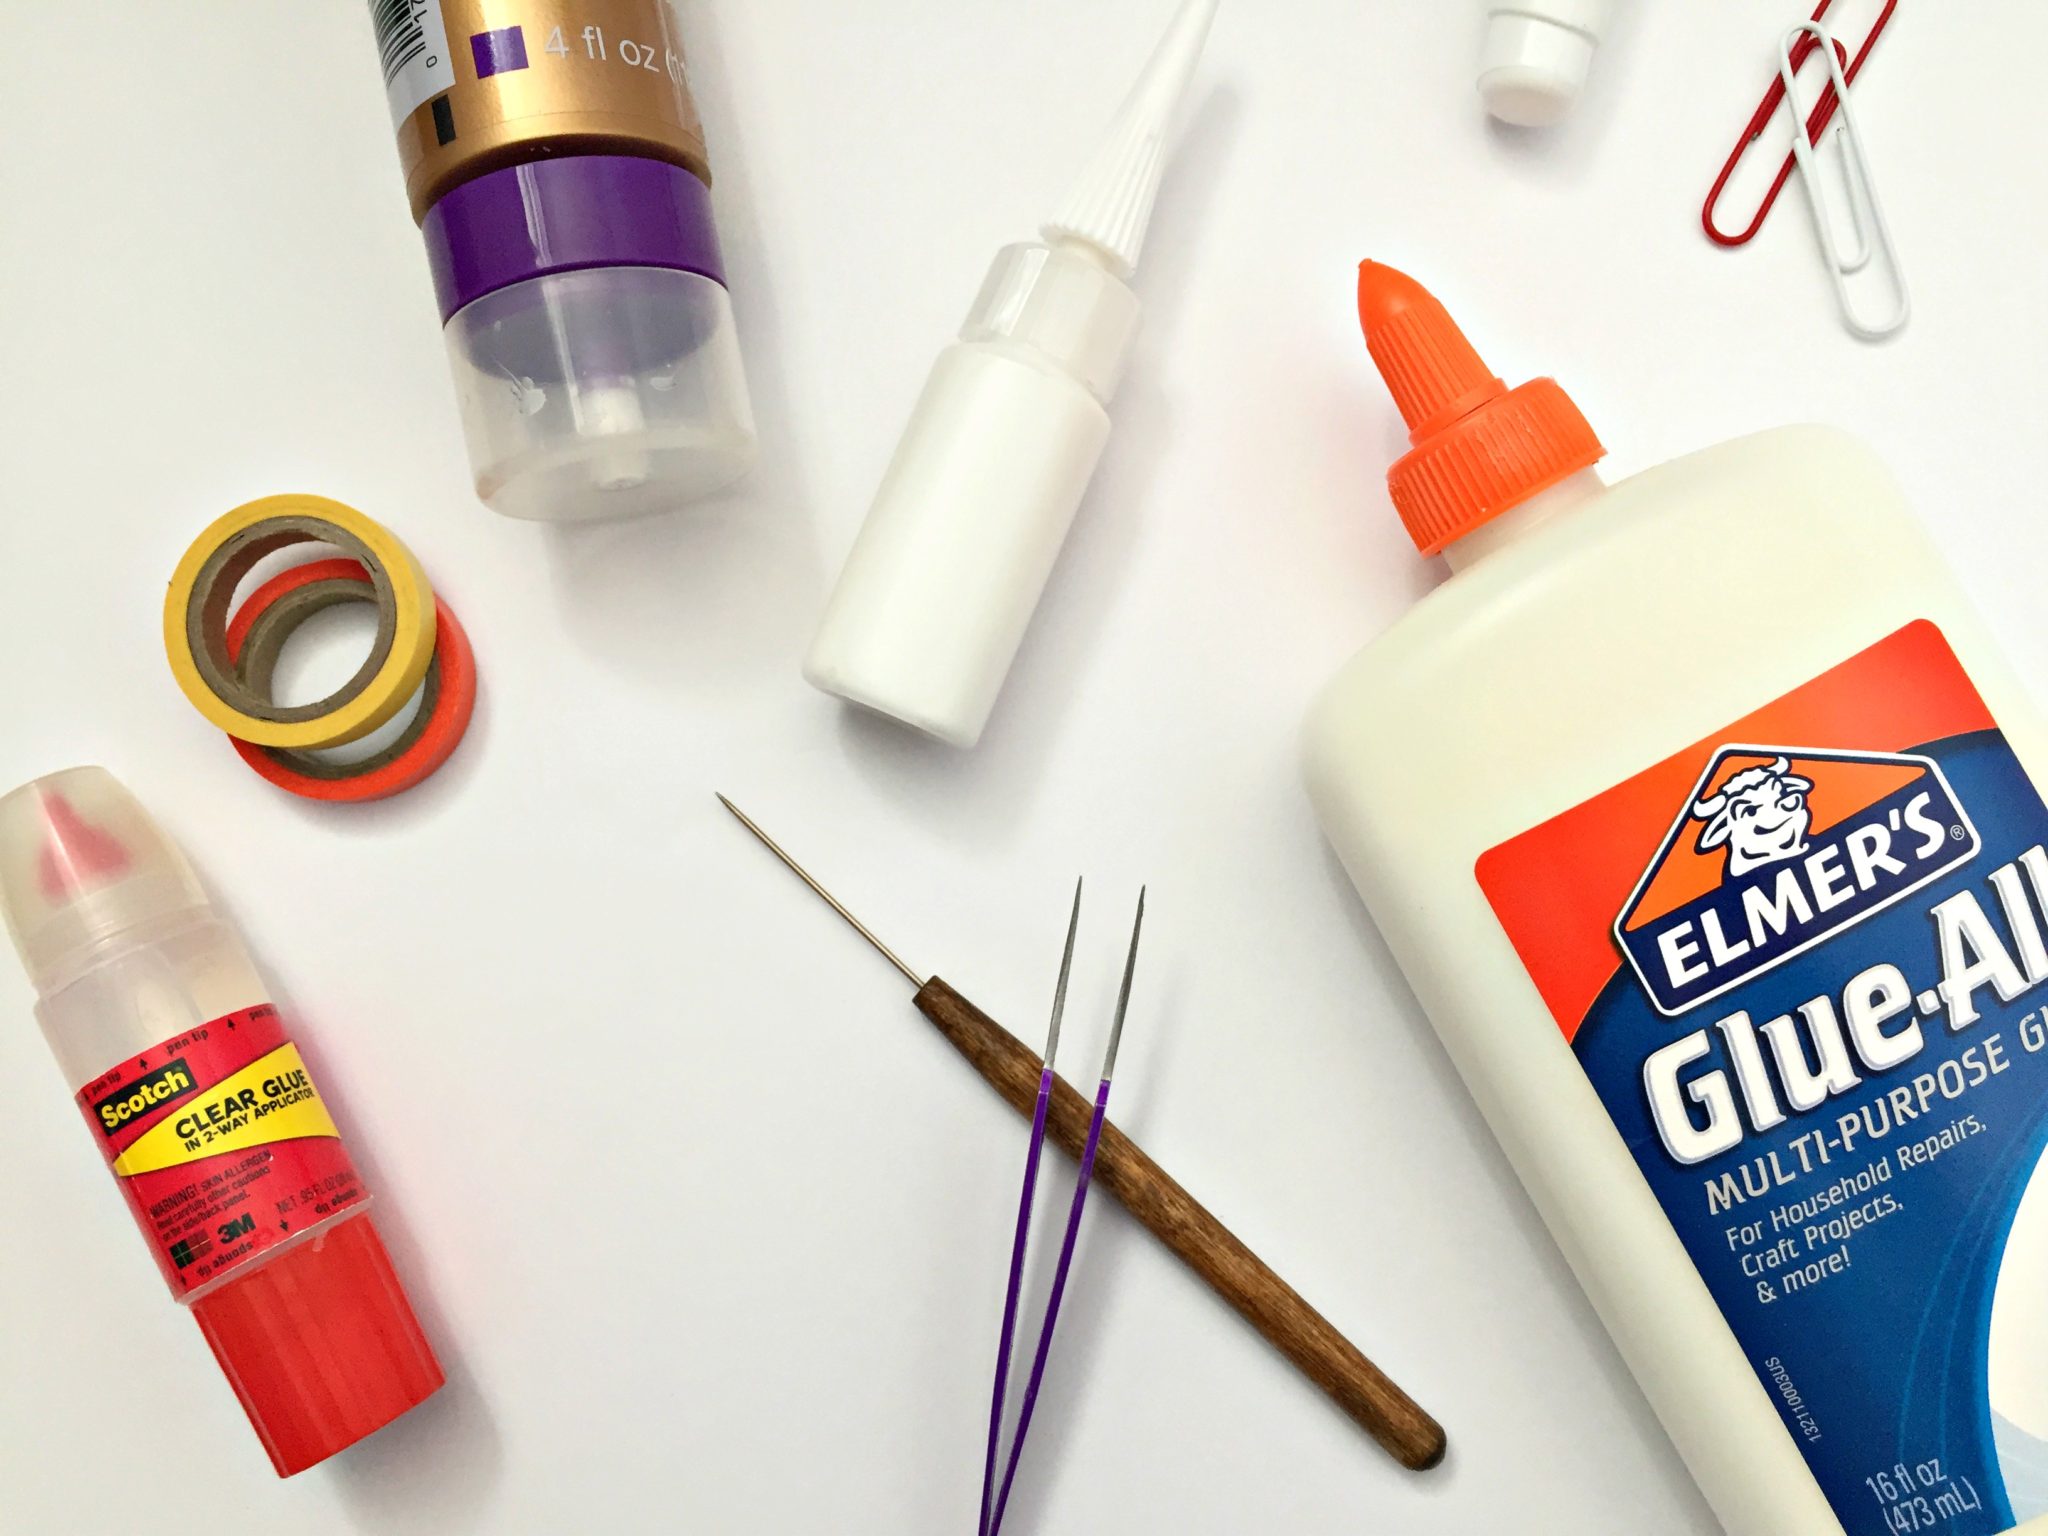 What is the difference between book binding glue and Elmer's glue